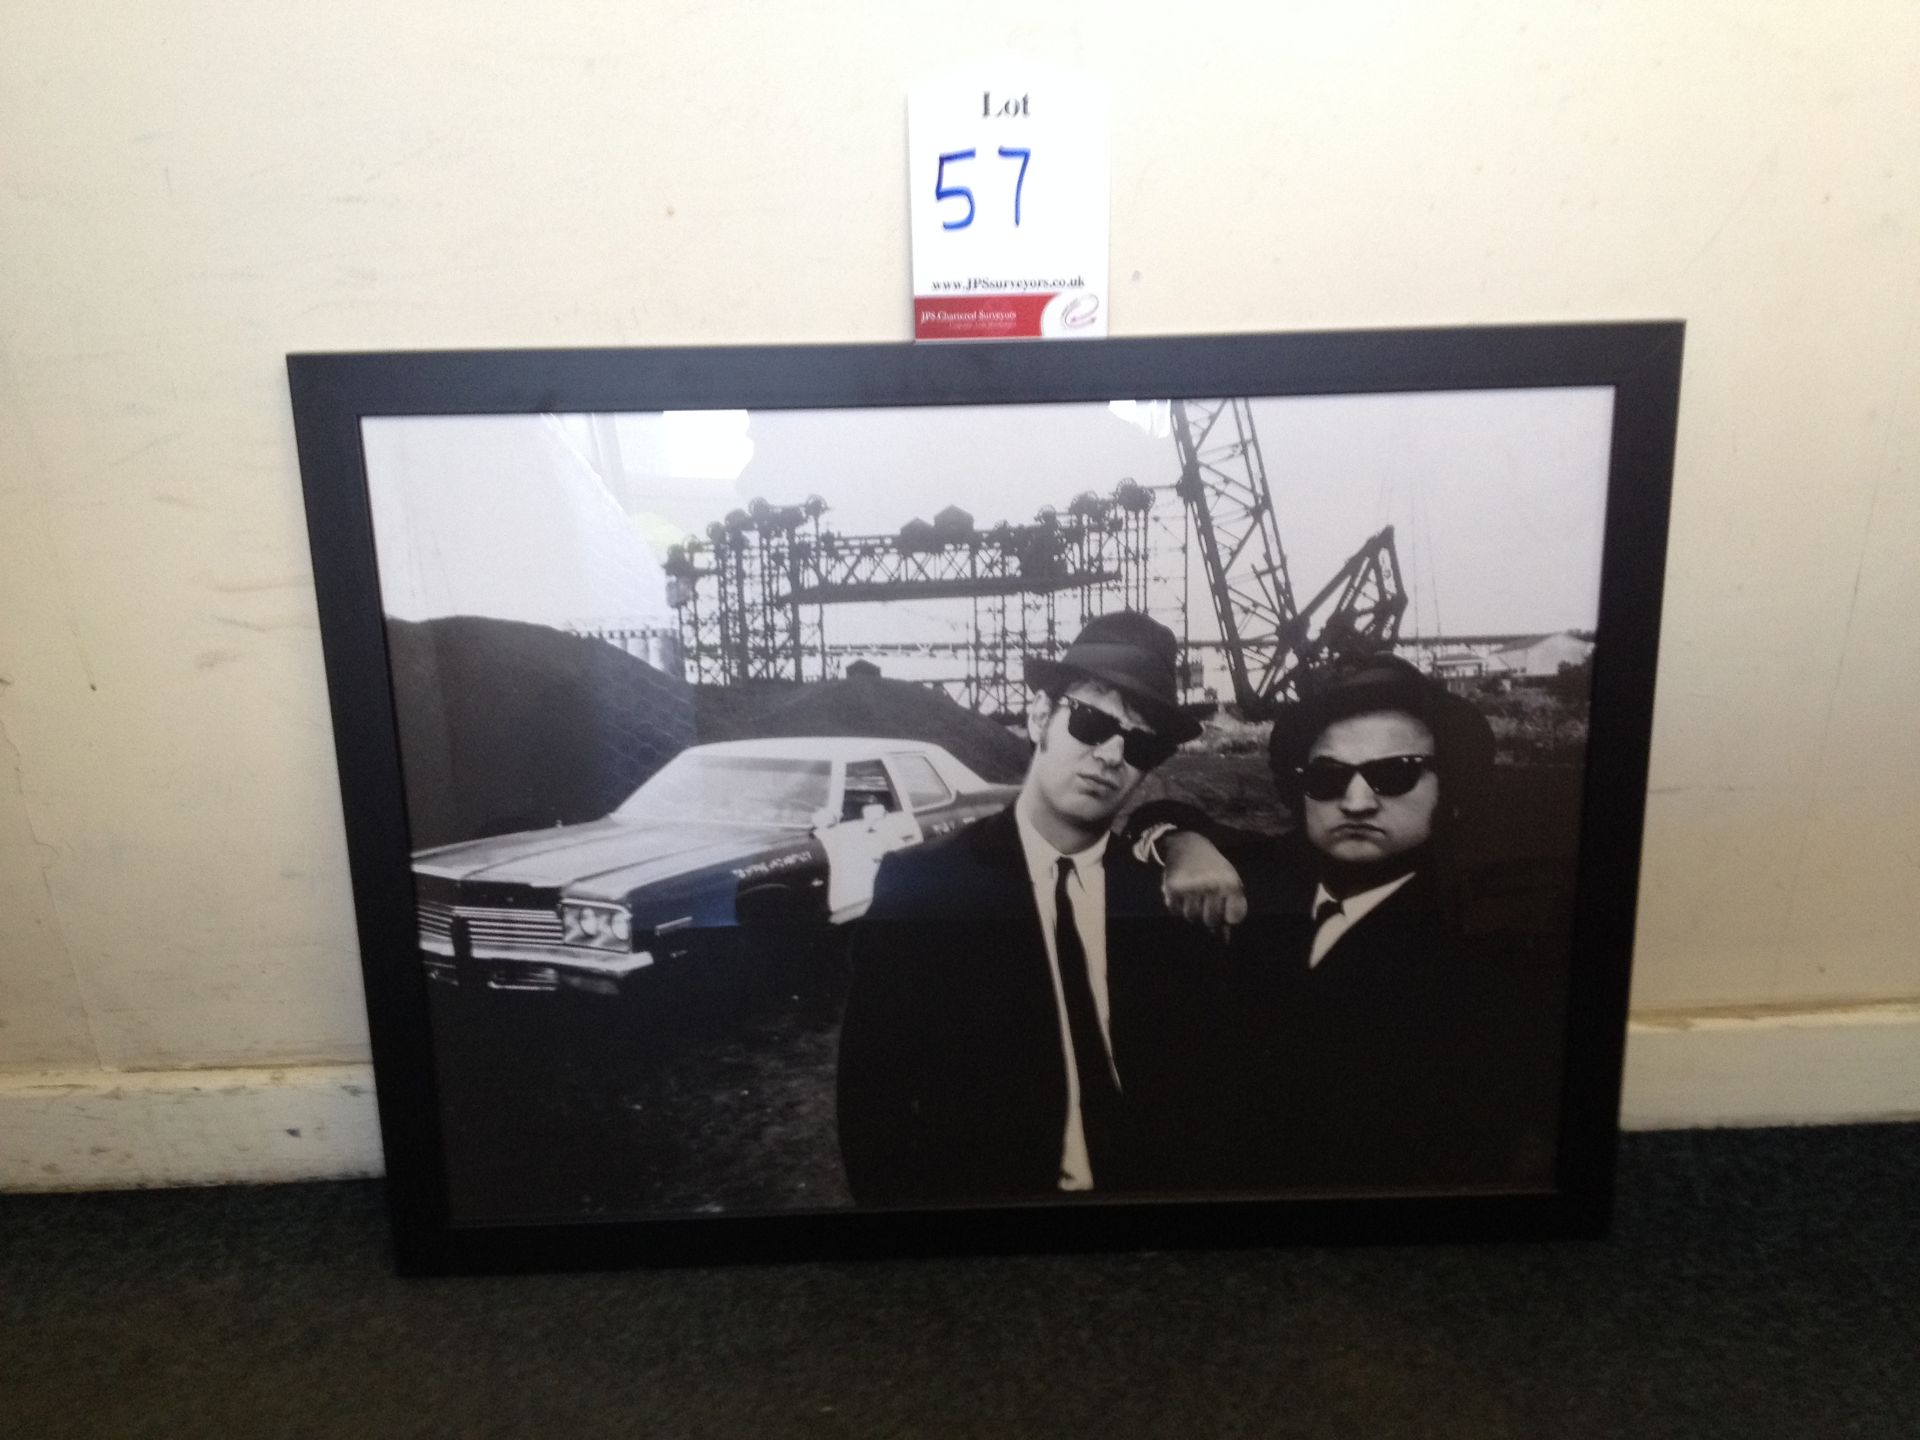 Blues Brothers Framed Print Size: 76 x 56cm